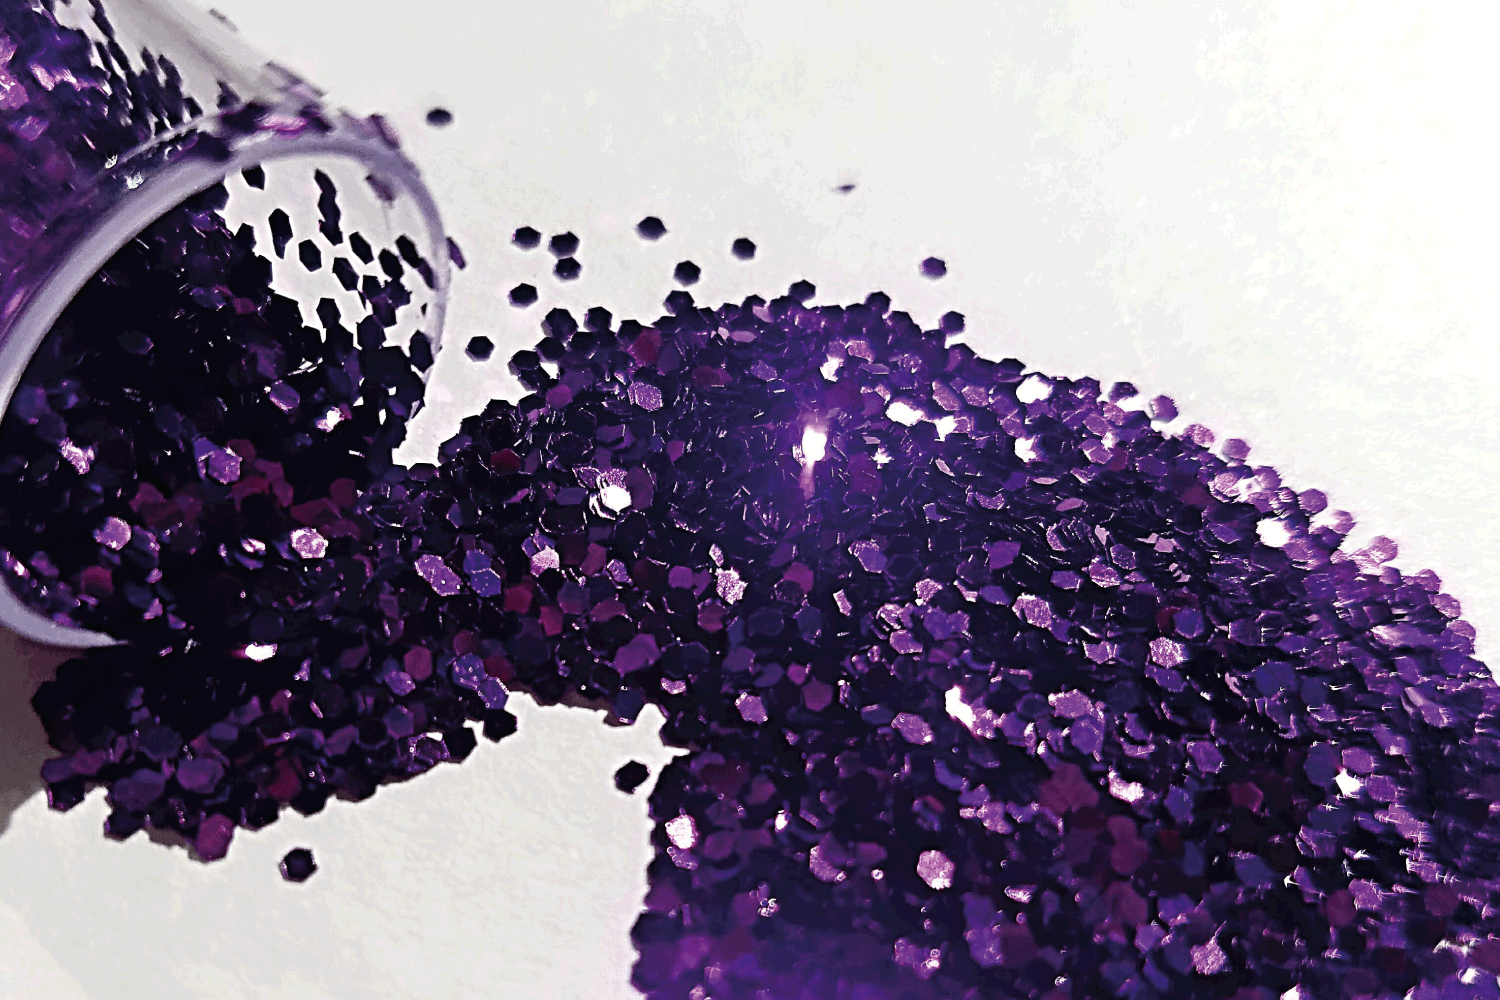 image of purple glitter spilled over a white background